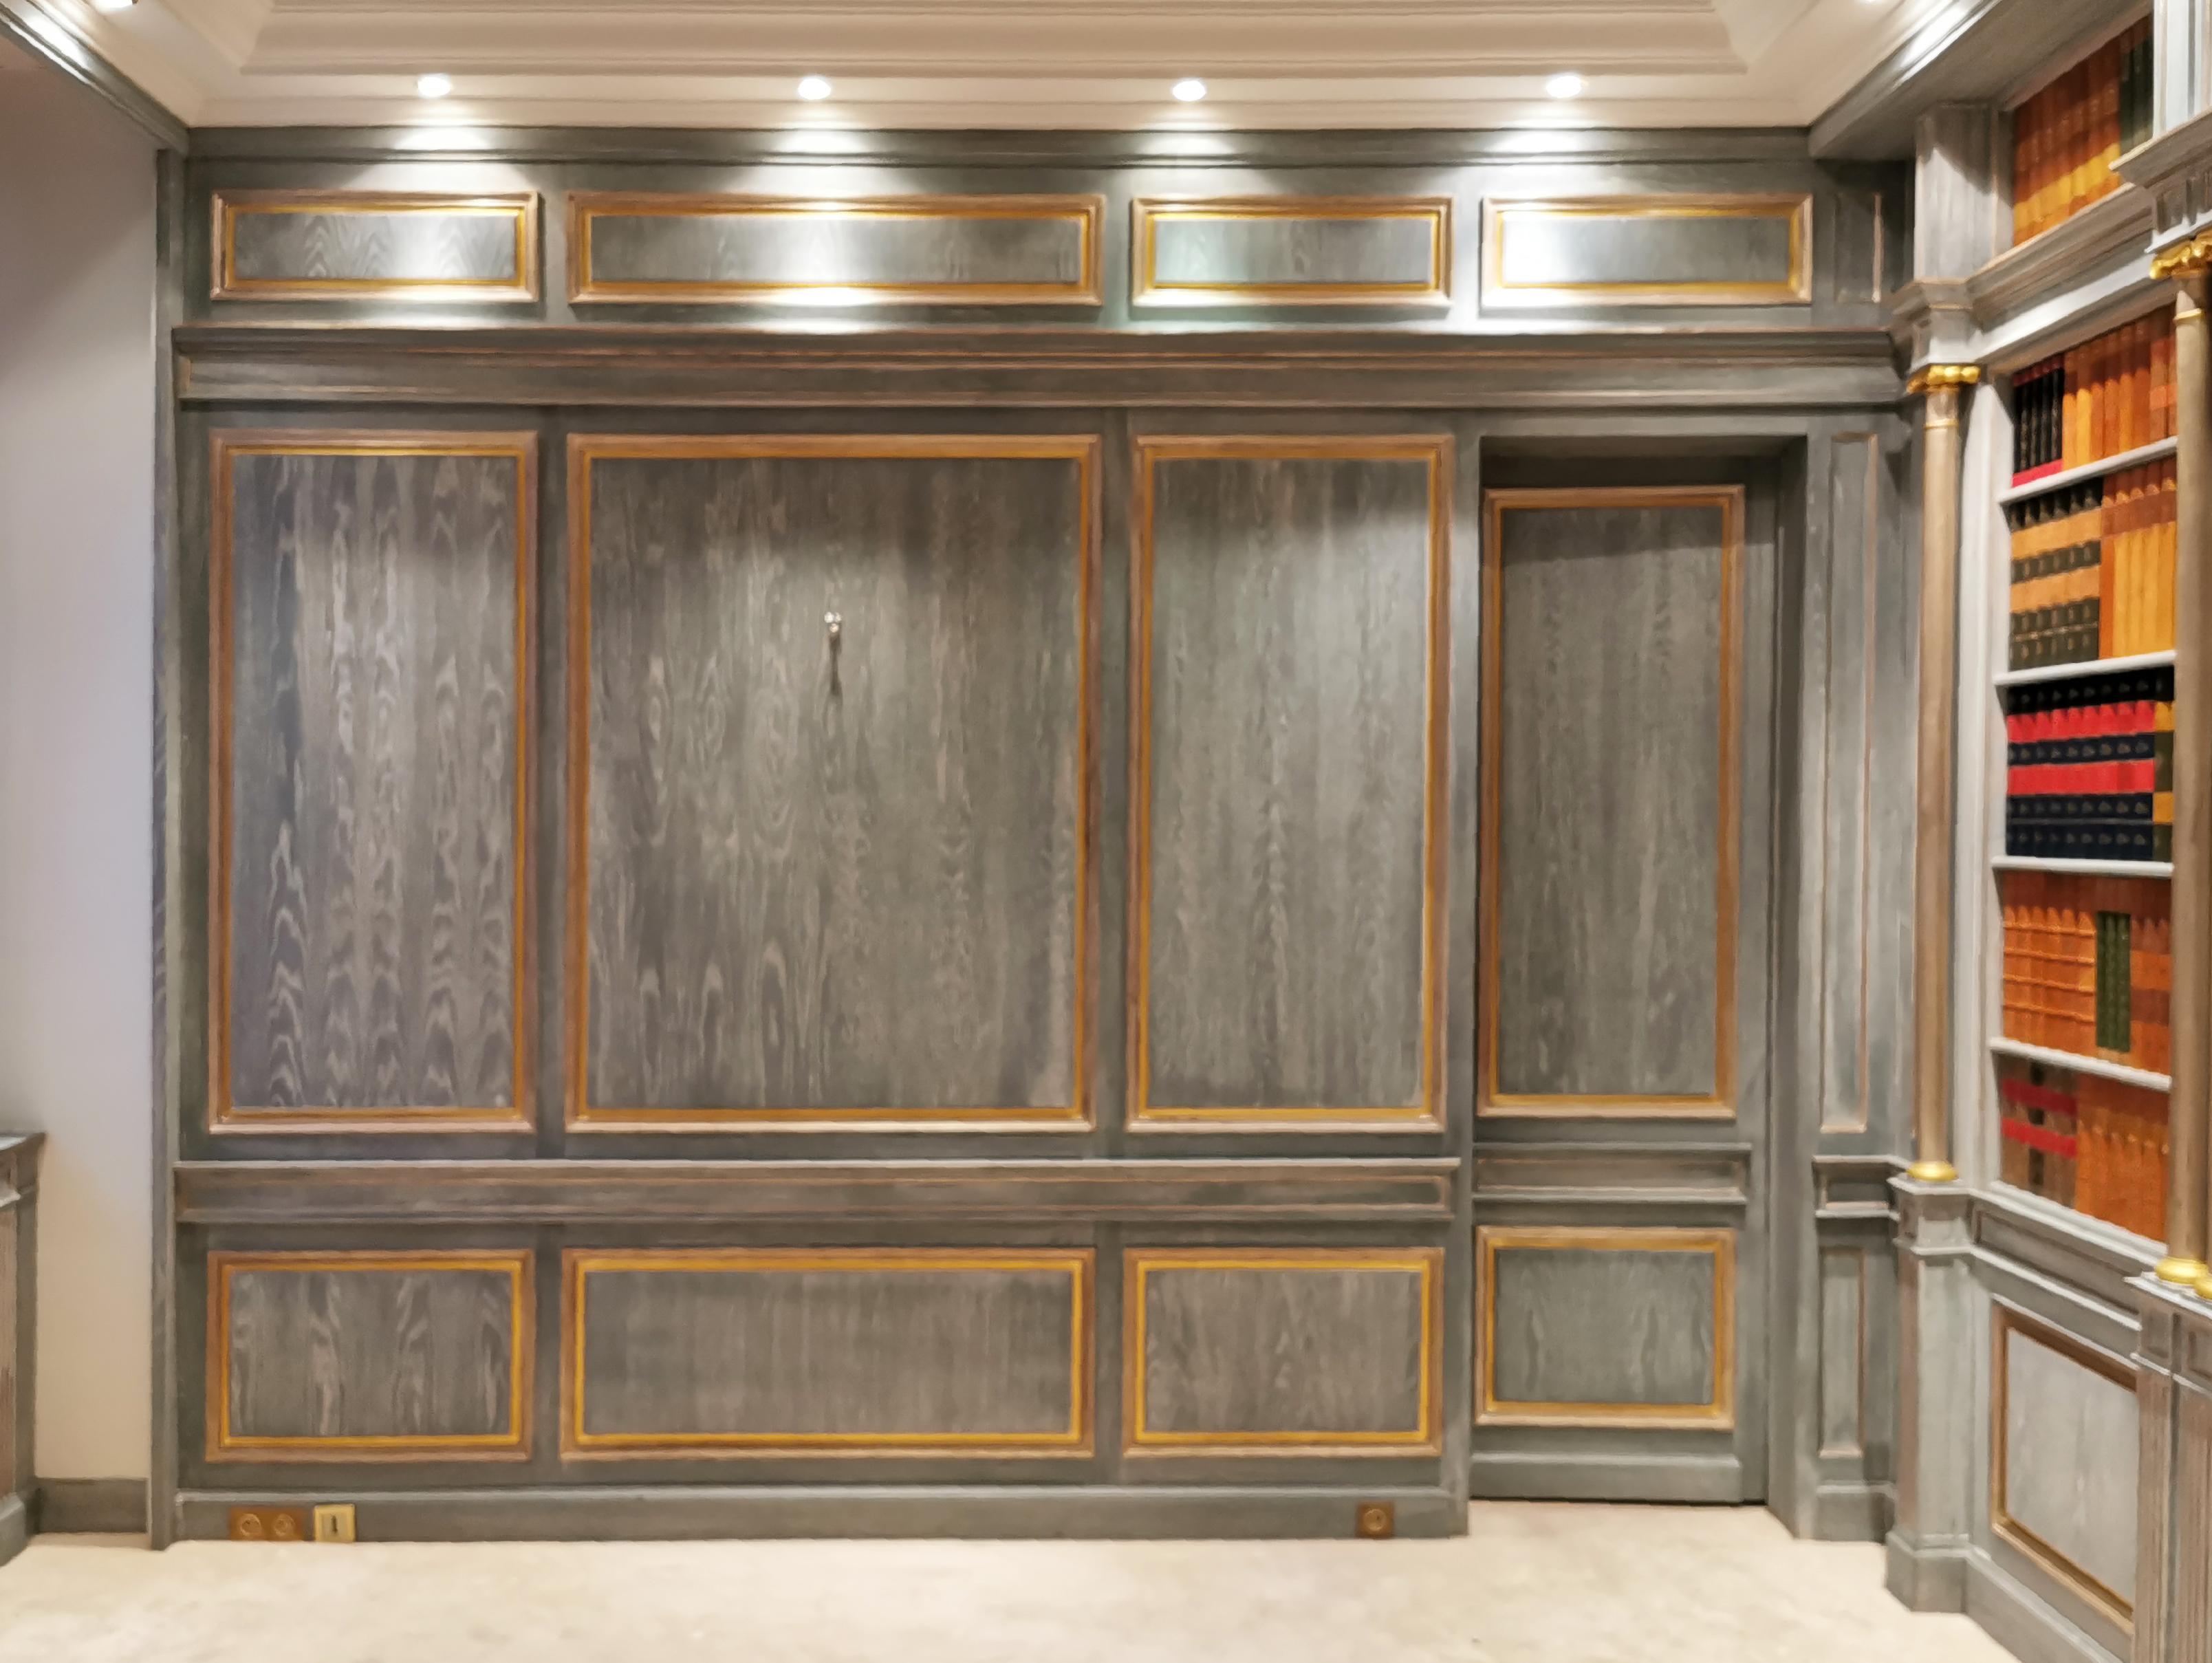 Wood Paneled Room with Trompe L'oeil Library Decoration, Late 20th Century For Sale 6